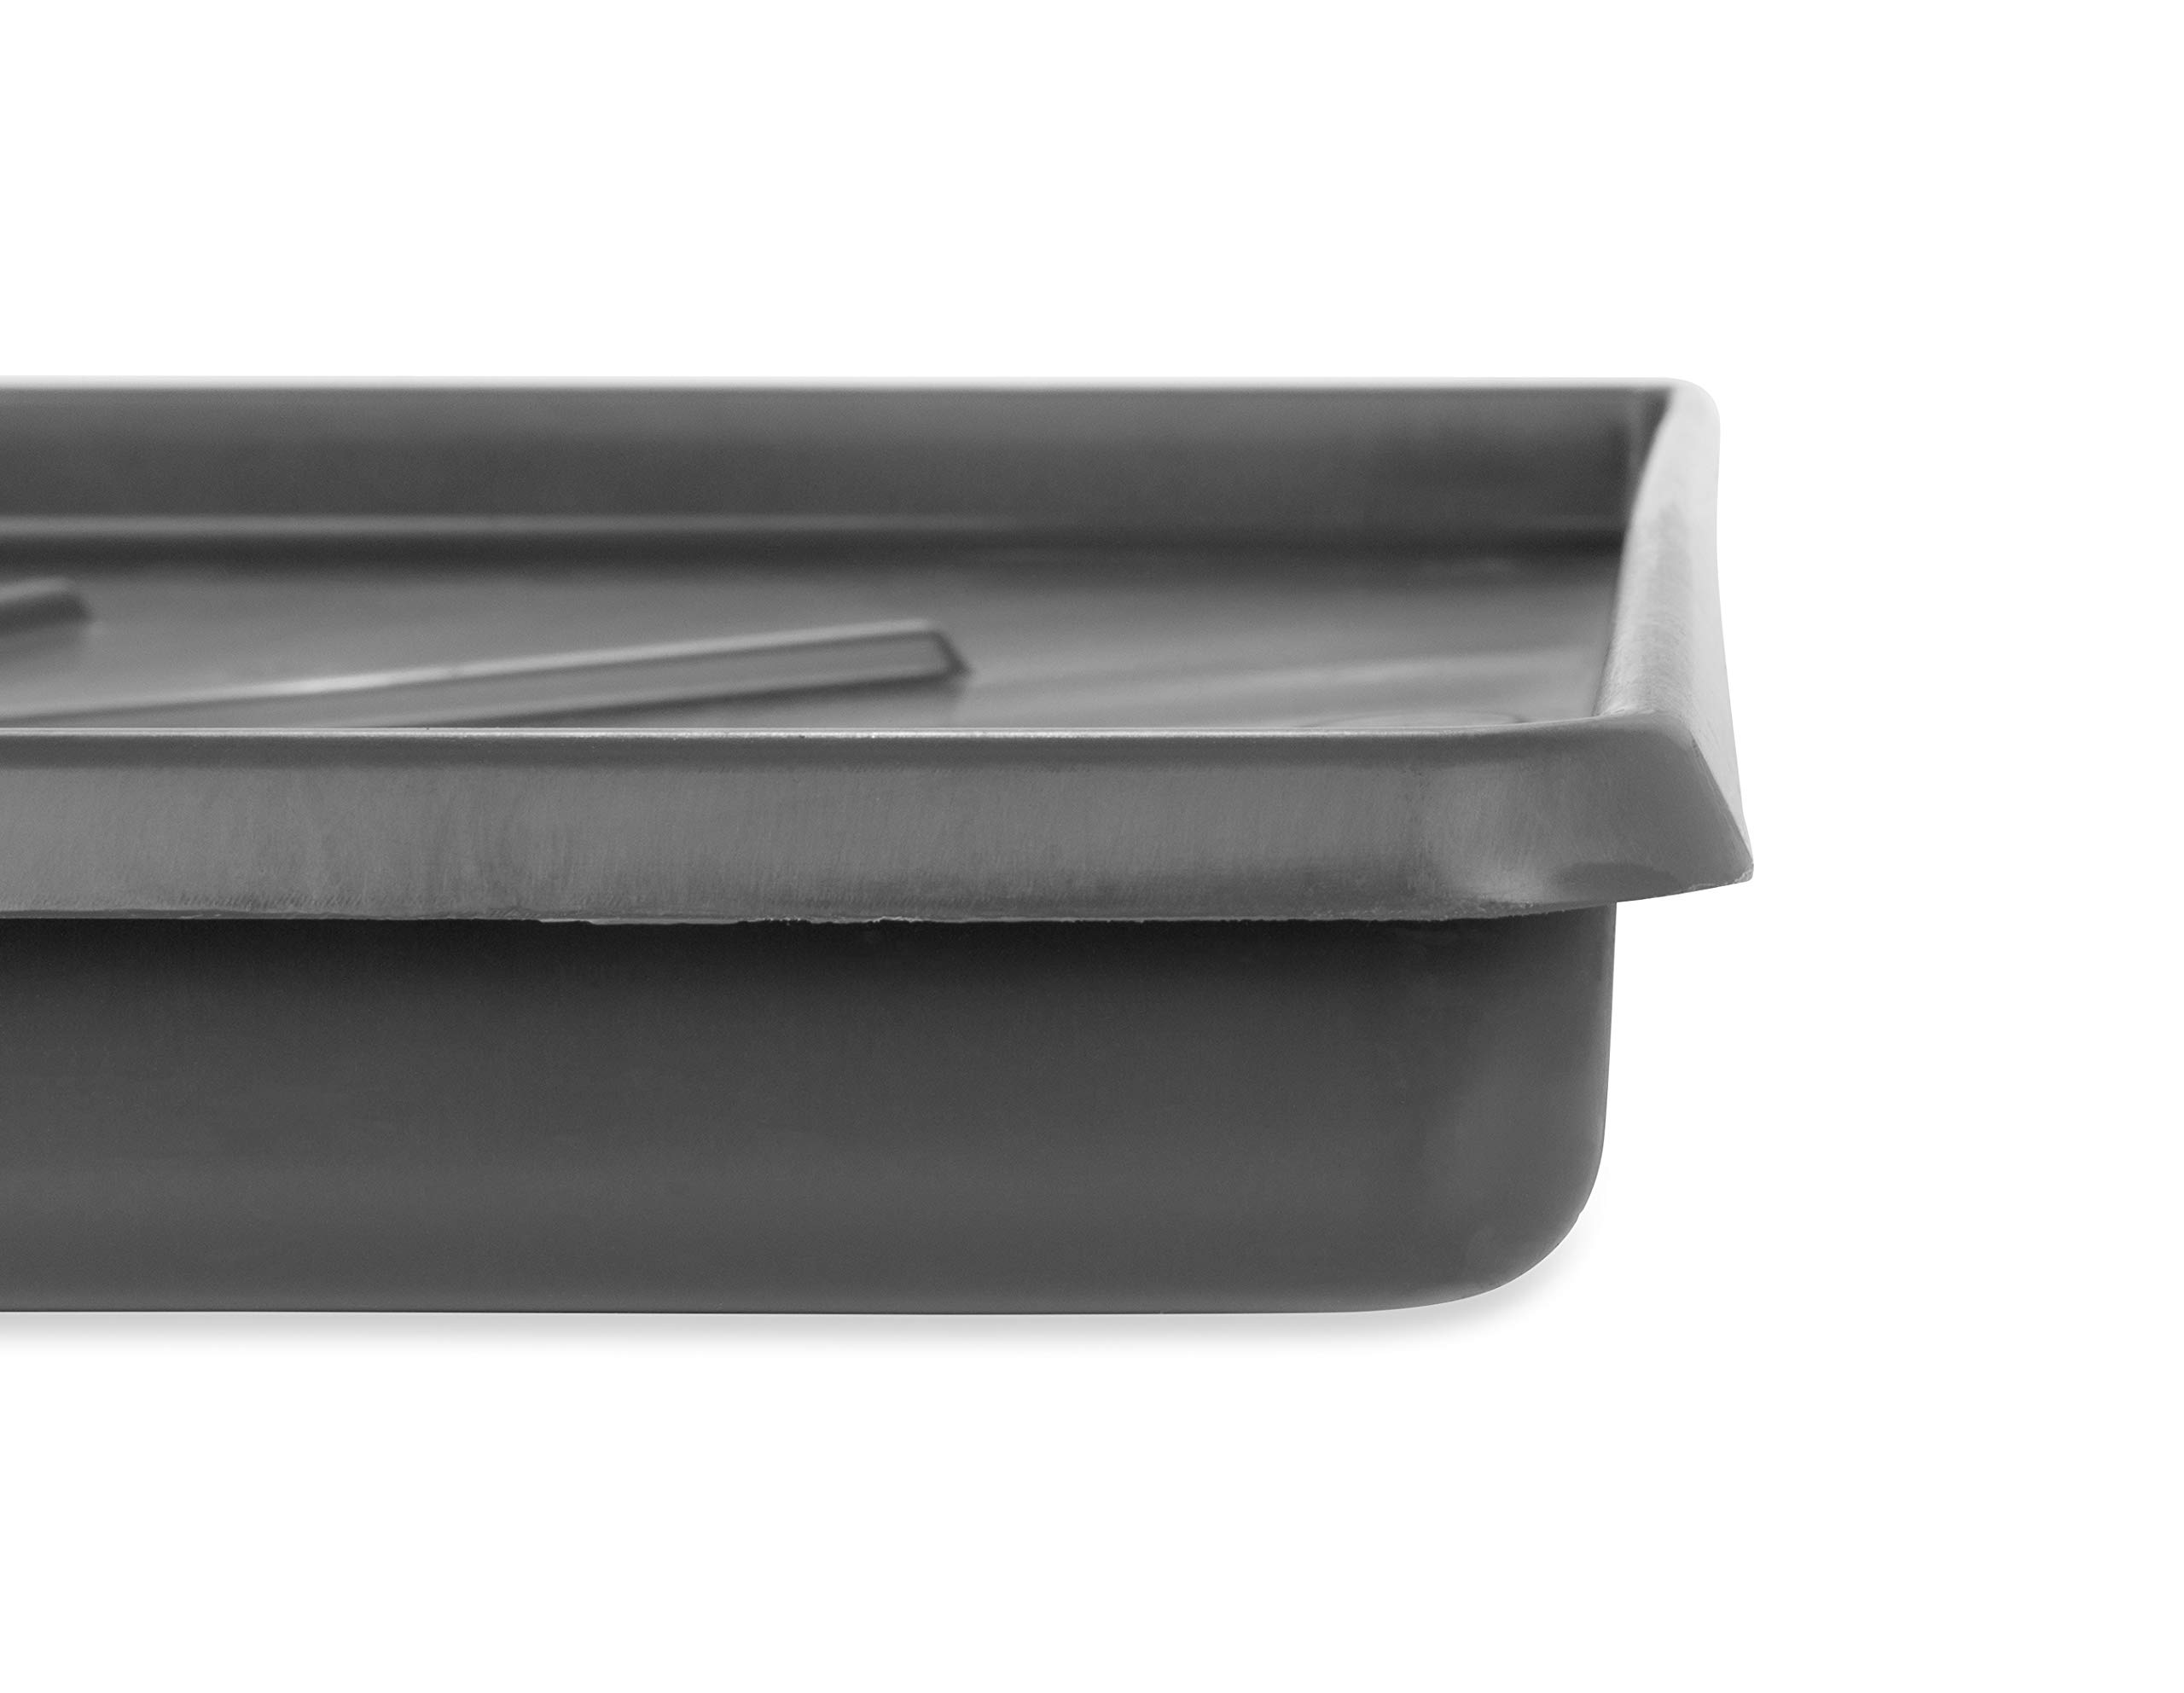 Camco 20784 Low Profile Washing Machine Drain Pan with PVC Fitting, 30 ½-Inch x 34 ½-Inch, Graphite - Protects Your Floors from Washing Machine Leaks - Easy to Use